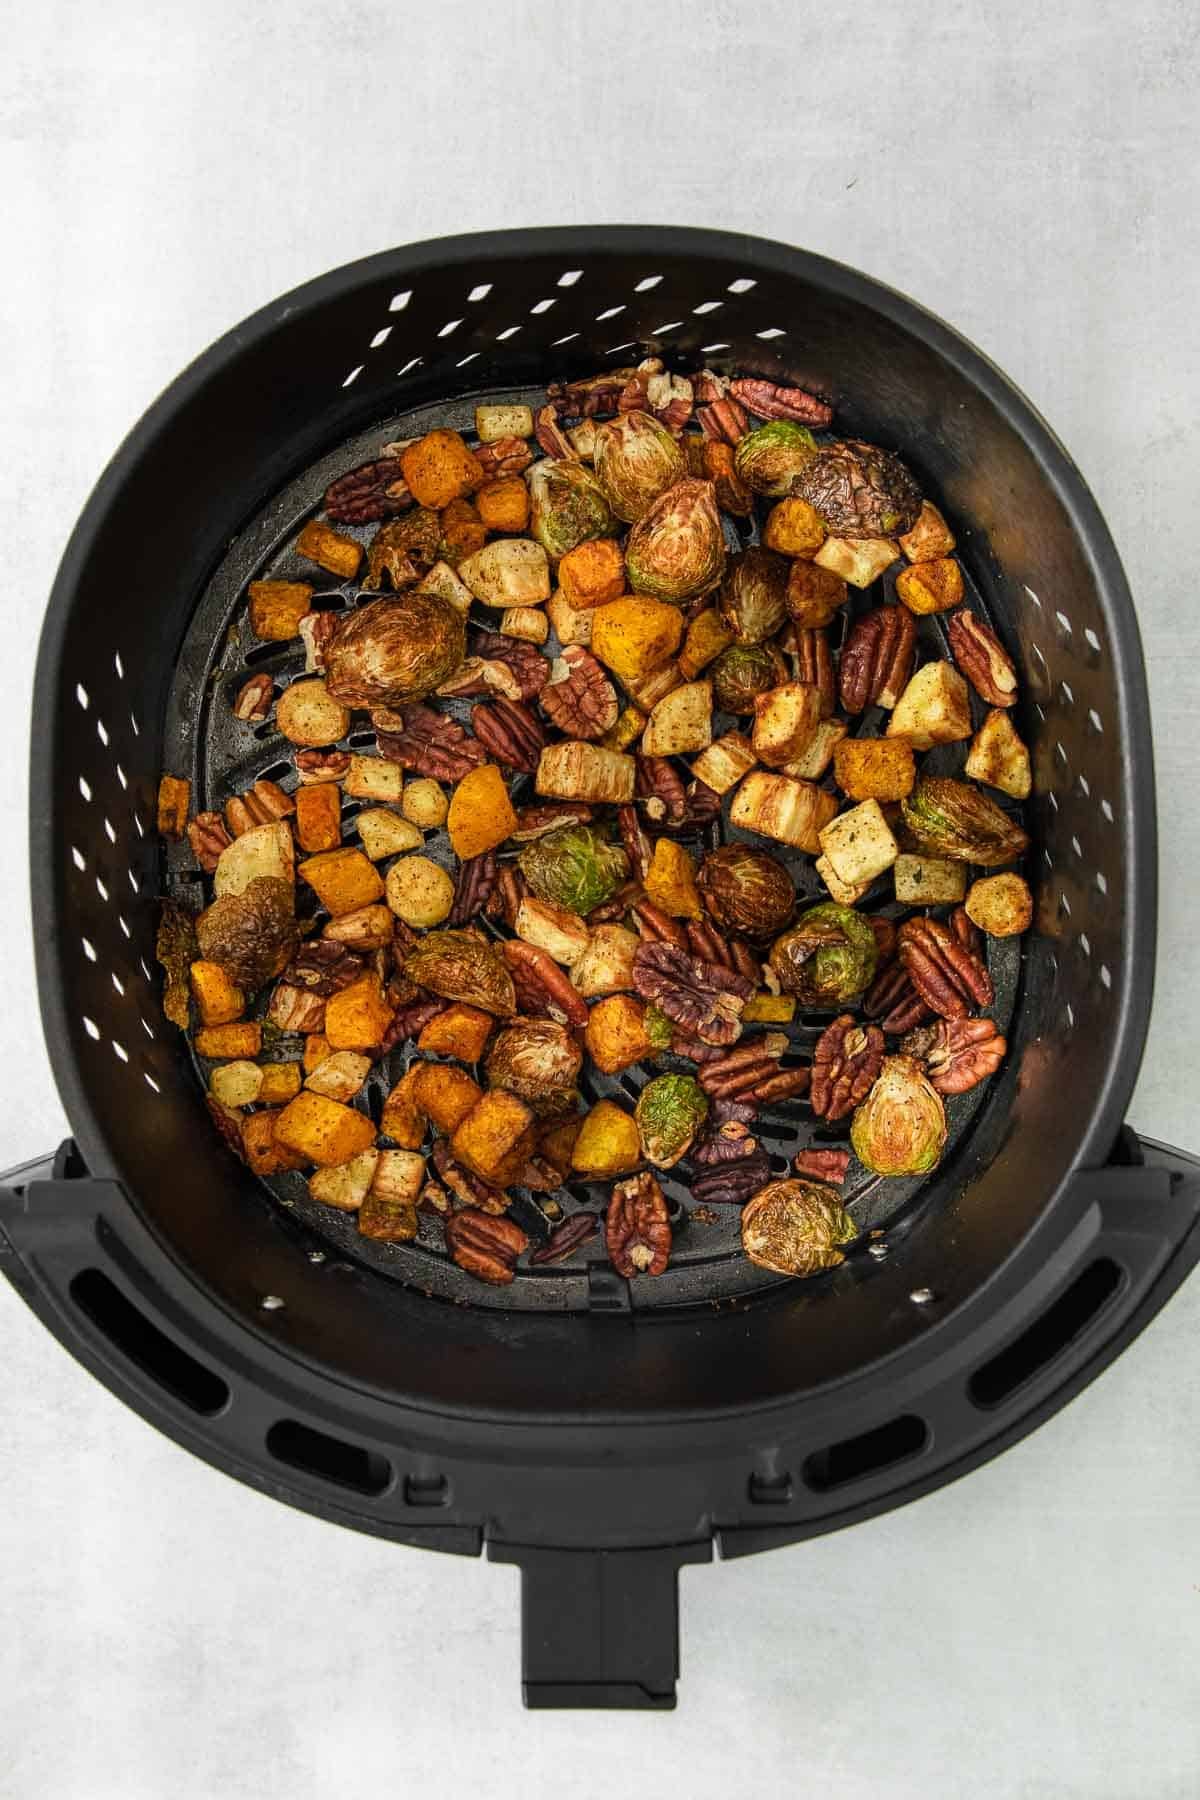 black air fryer basket with roasted brussel sprouts, butternut squash, parsnips and pecan halves.